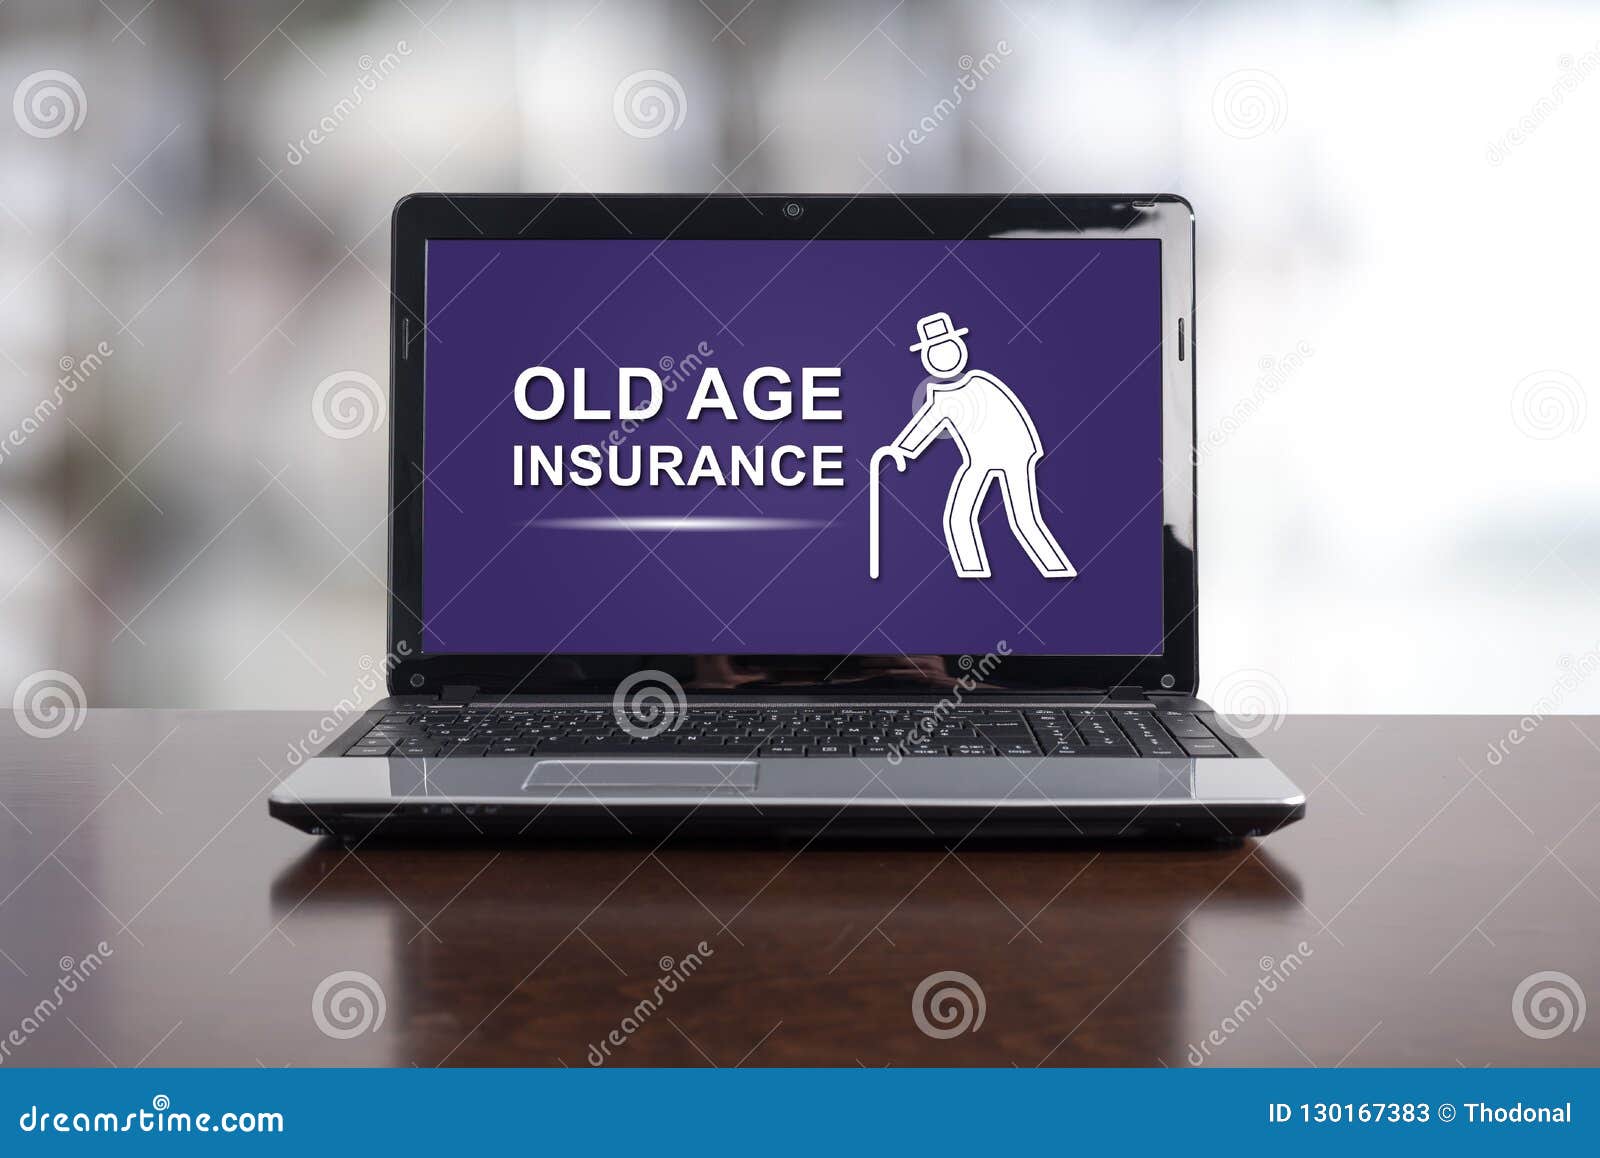 Old Age Insurance Concept On A Laptop Stock Image - Image ...